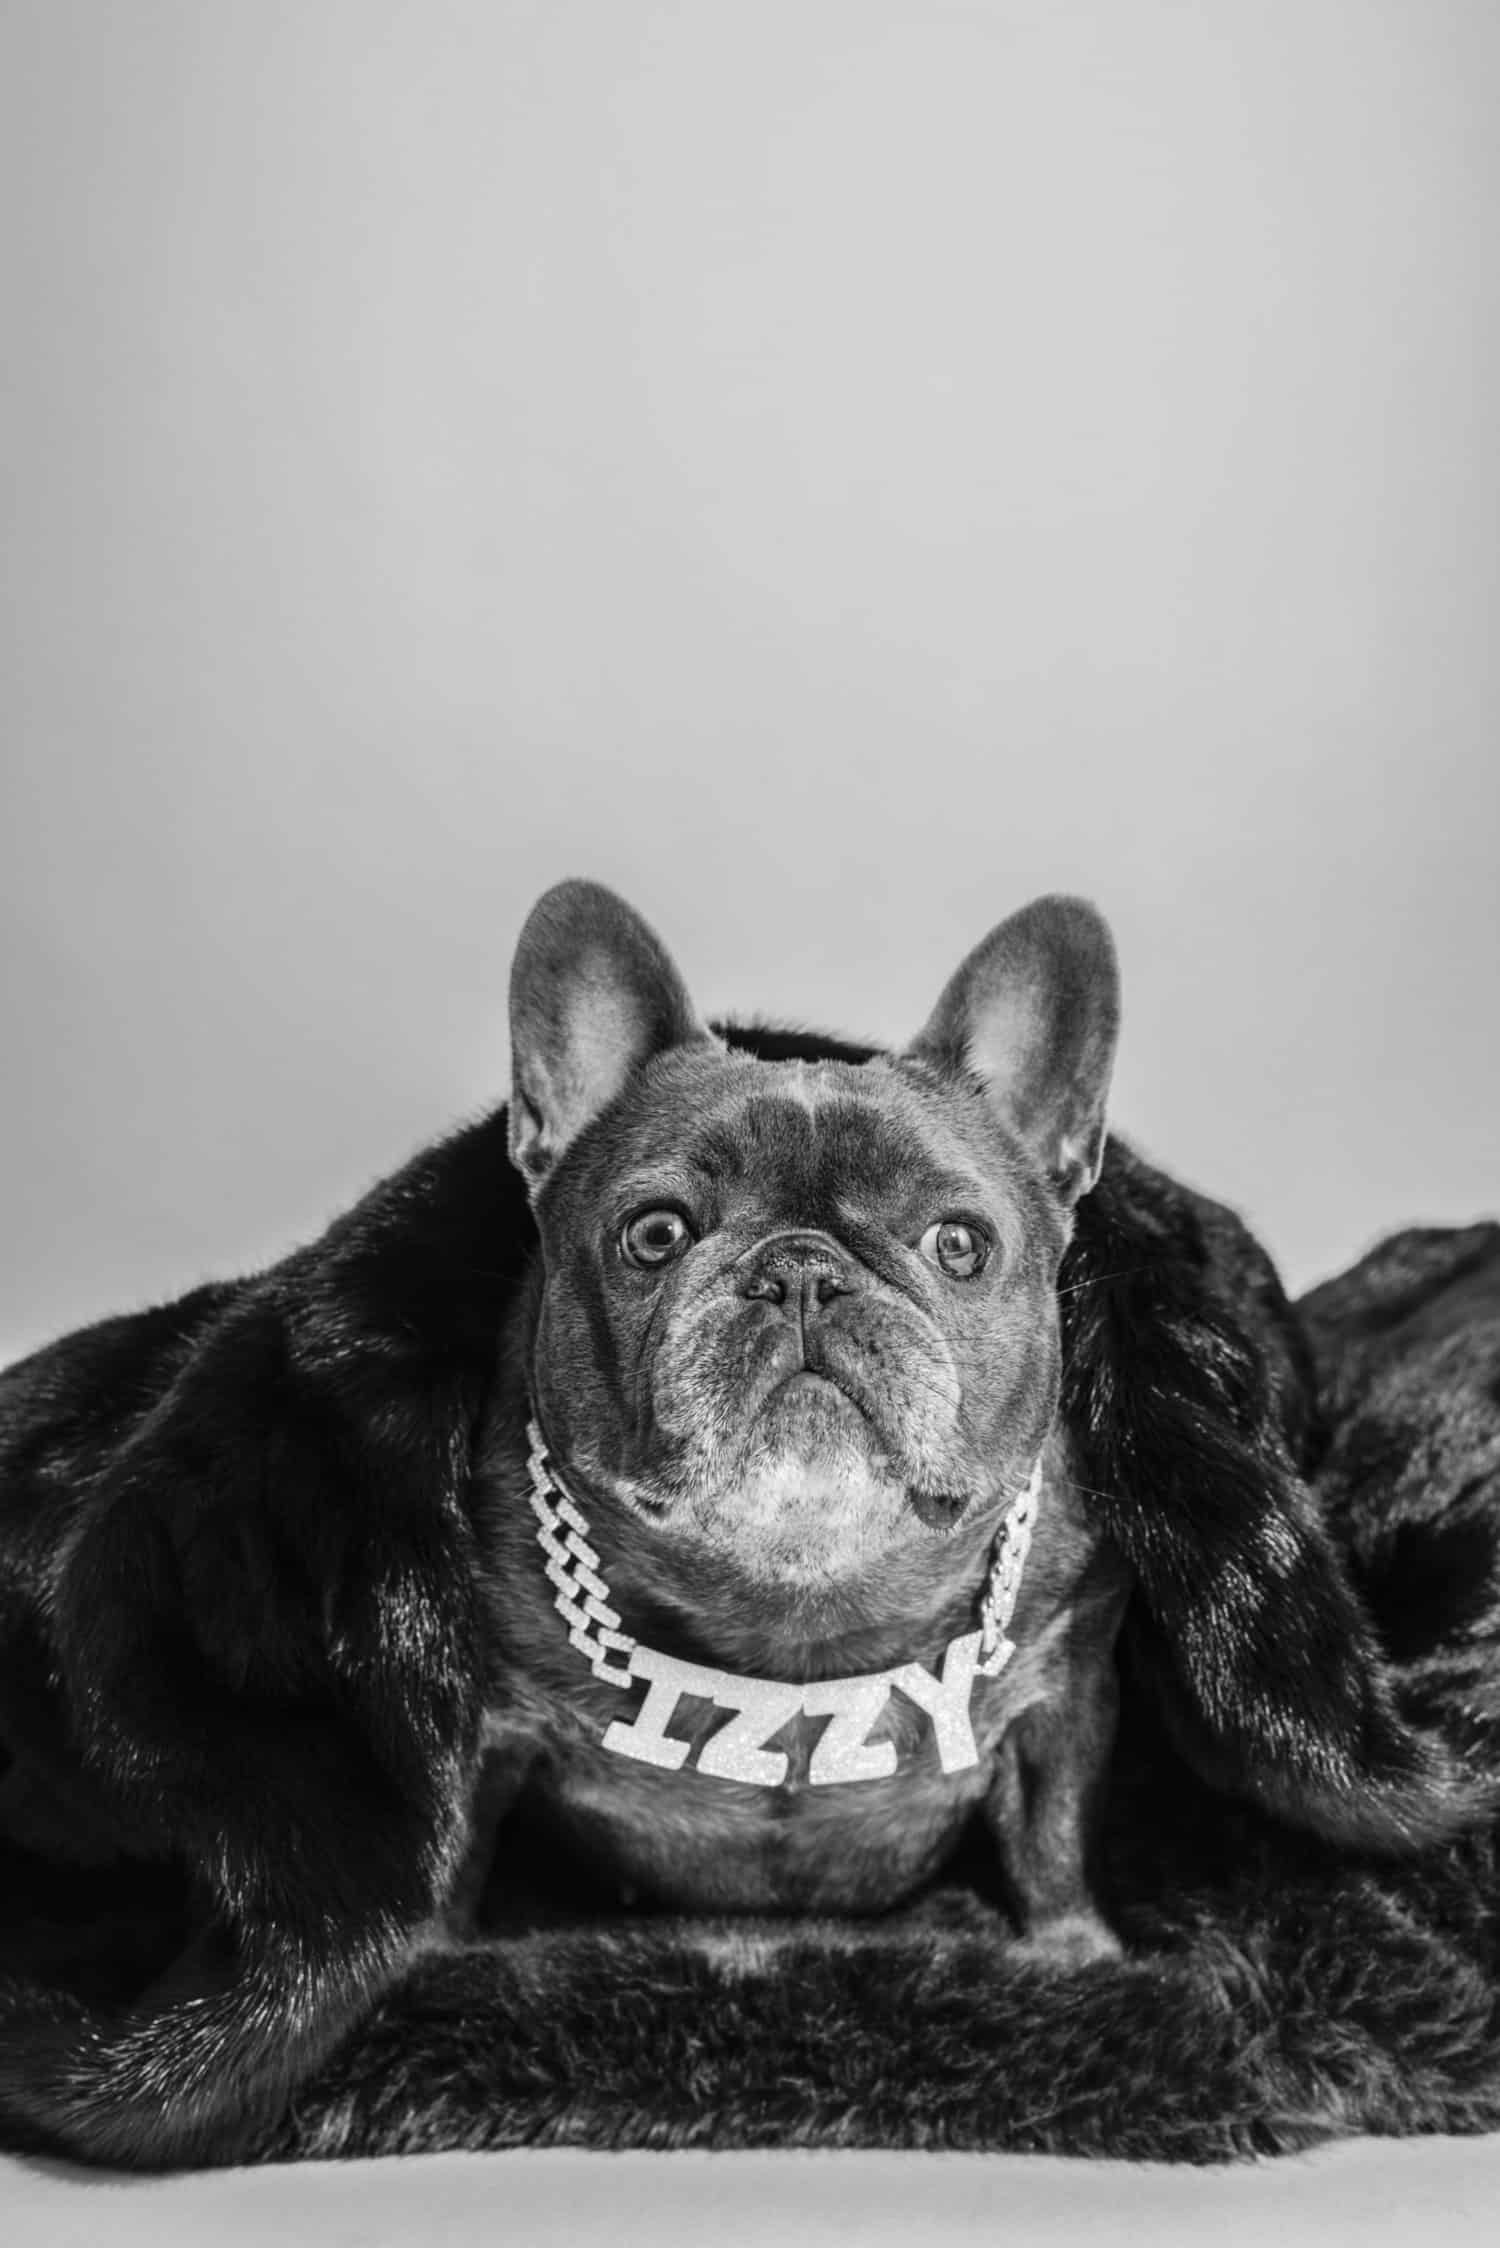 All I need. French bulldog, traveling, Louis Vuitton